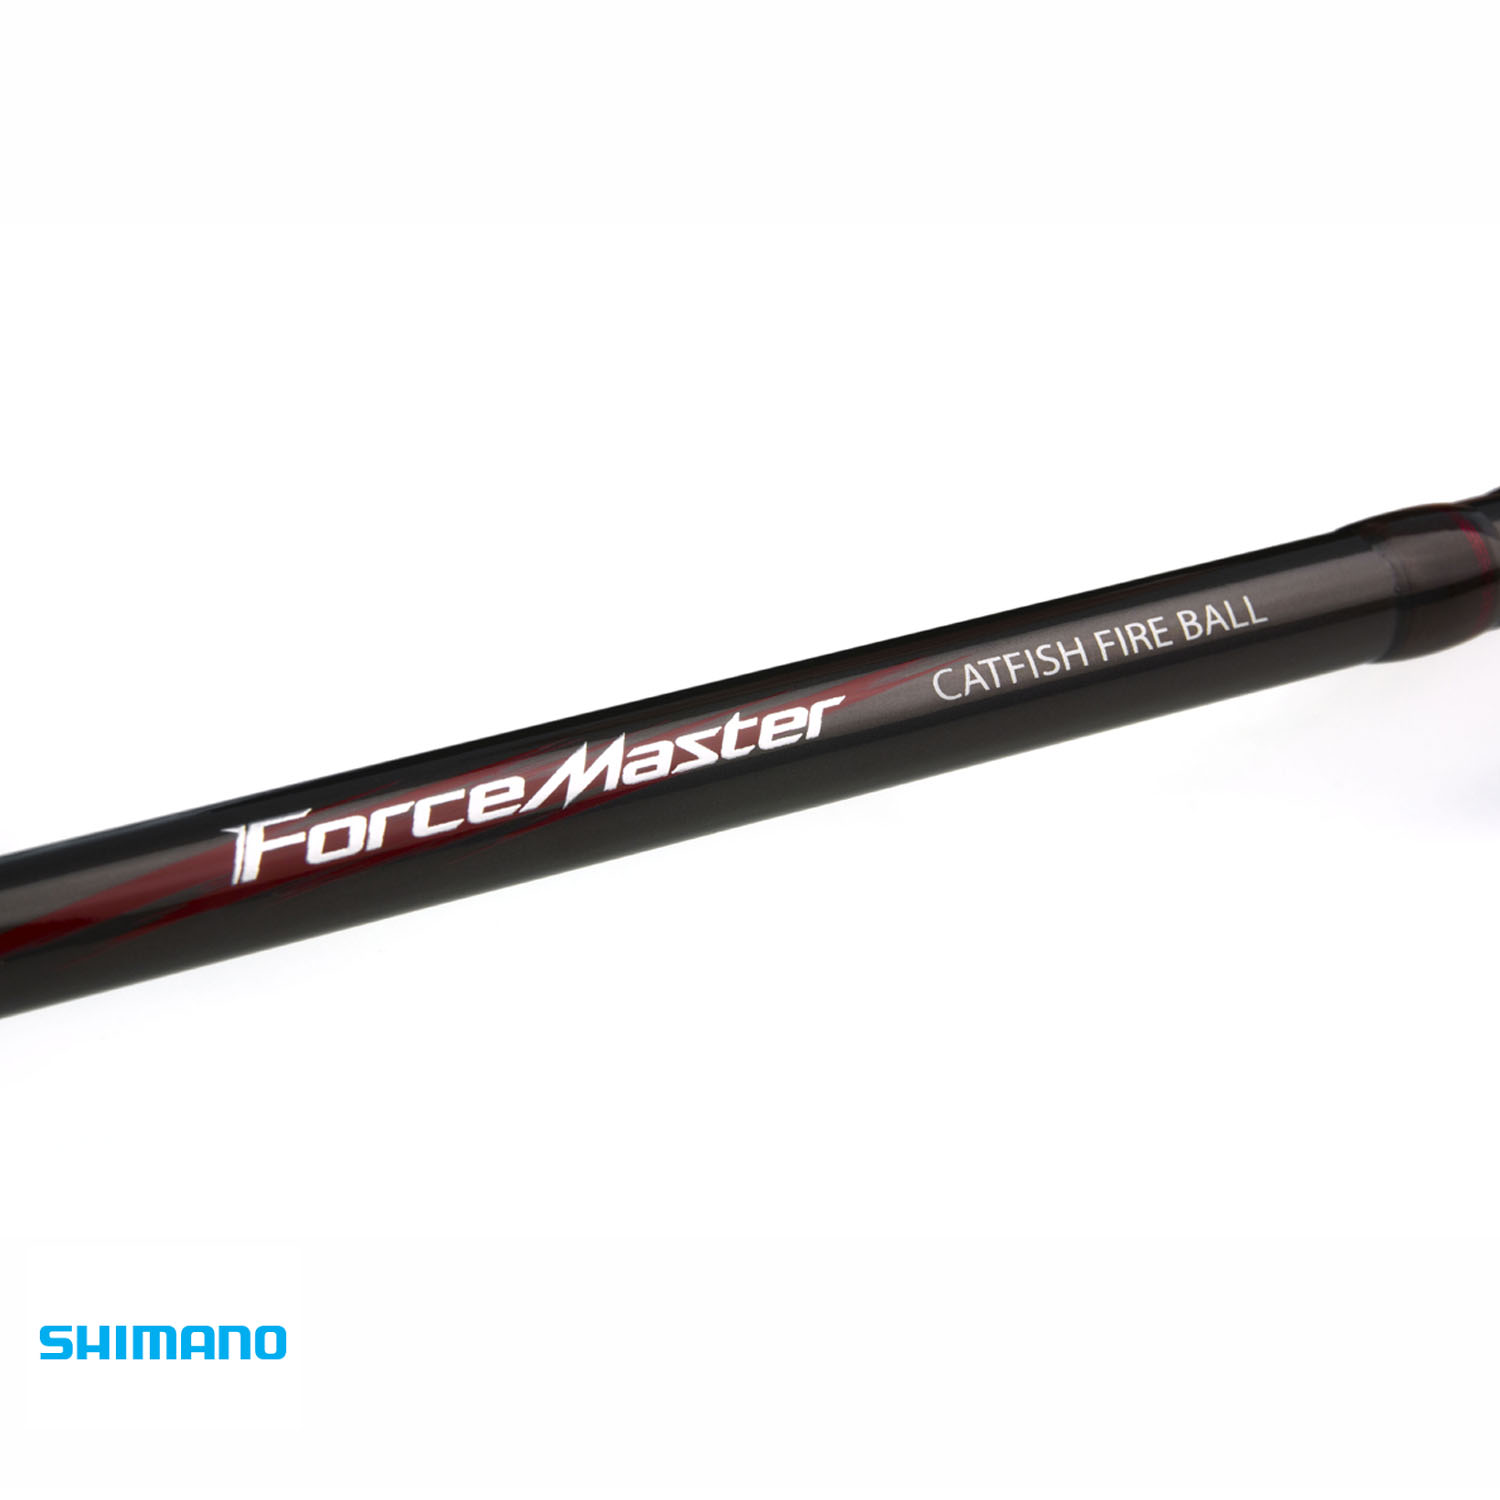 Canne Spinning Forcemaster Catfish Fire Ball 183 85-200g Shimano